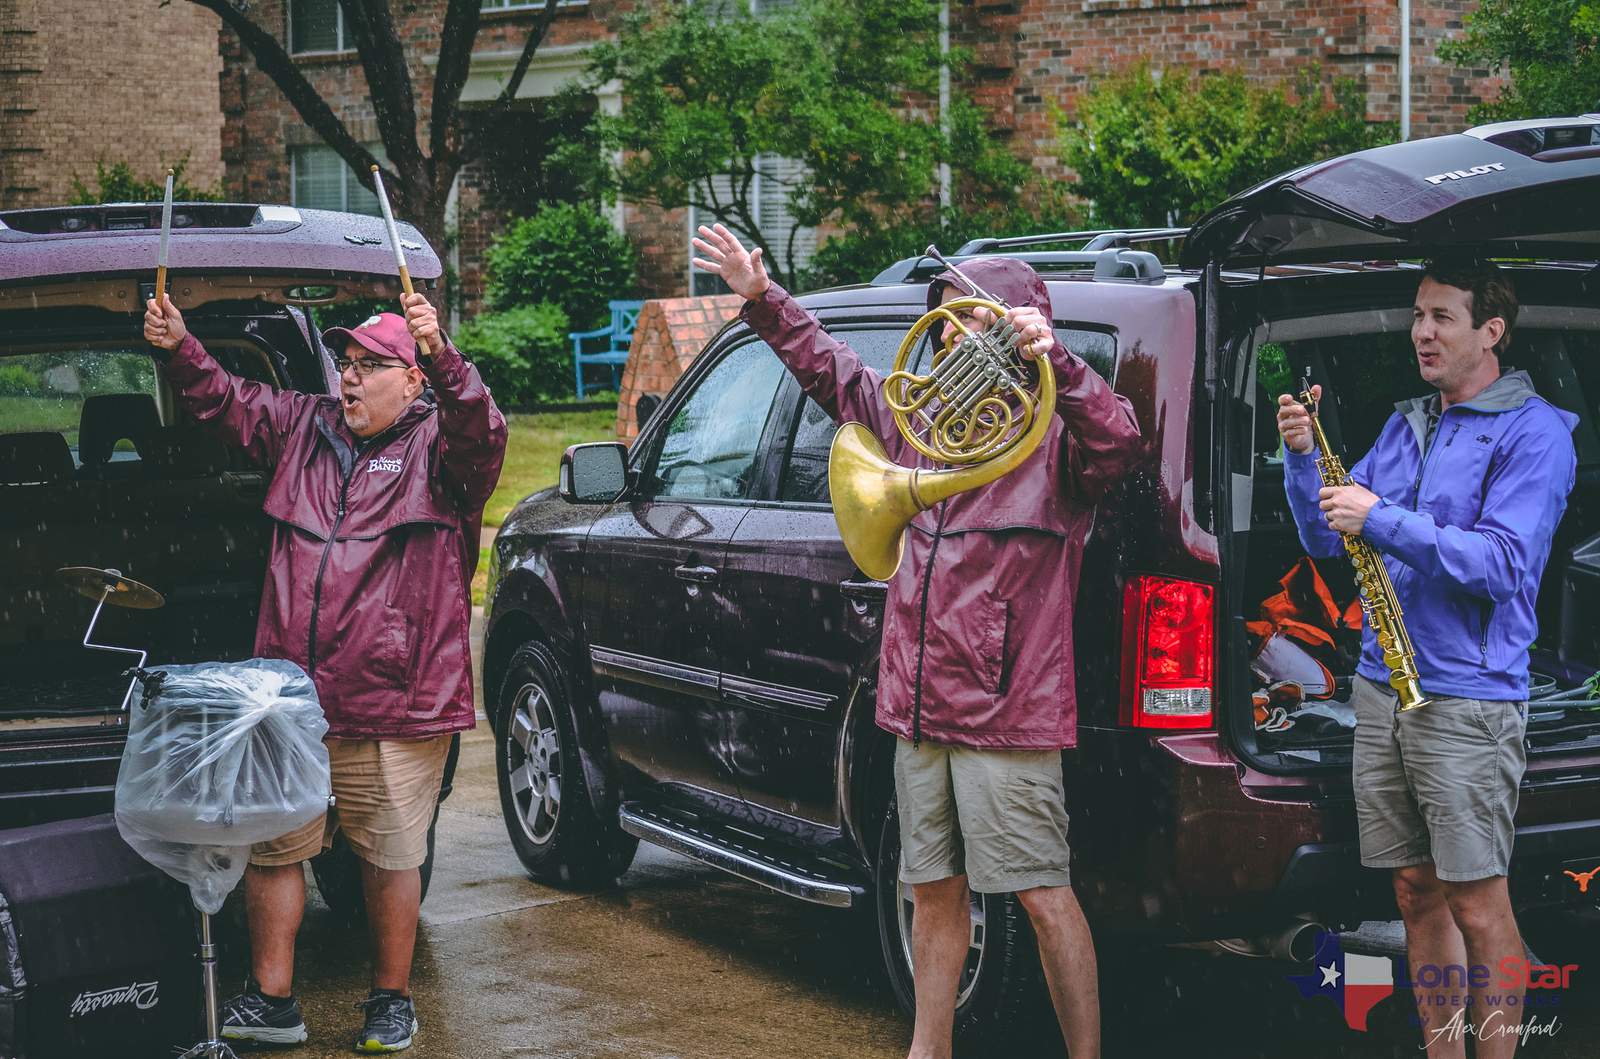 A Texas high school’s band directors went to each of their graduating seniors’ homes to play their fight song one last time